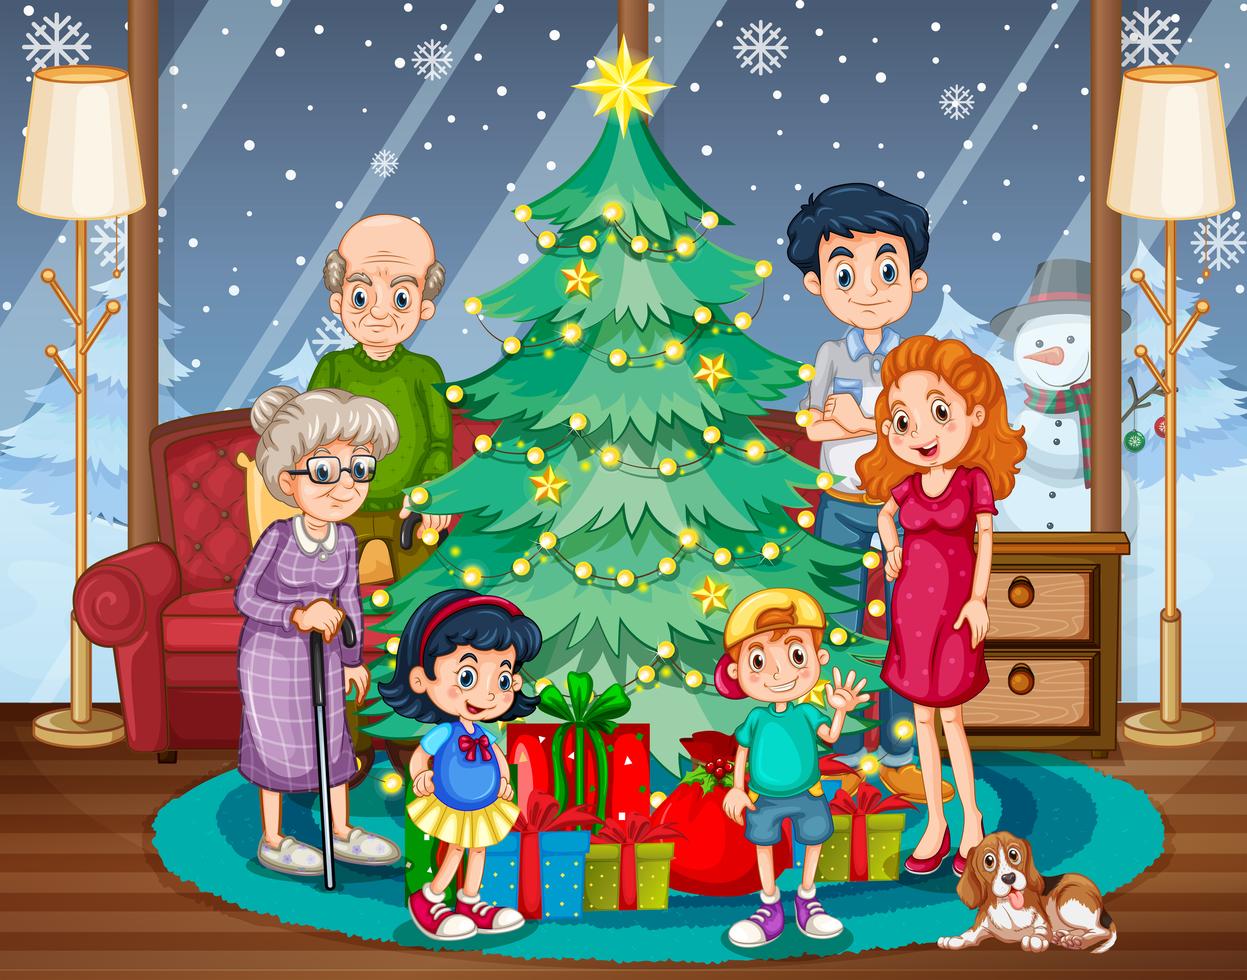 Download Family gathering on Christmas - Download Free Vectors, Clipart Graphics & Vector Art